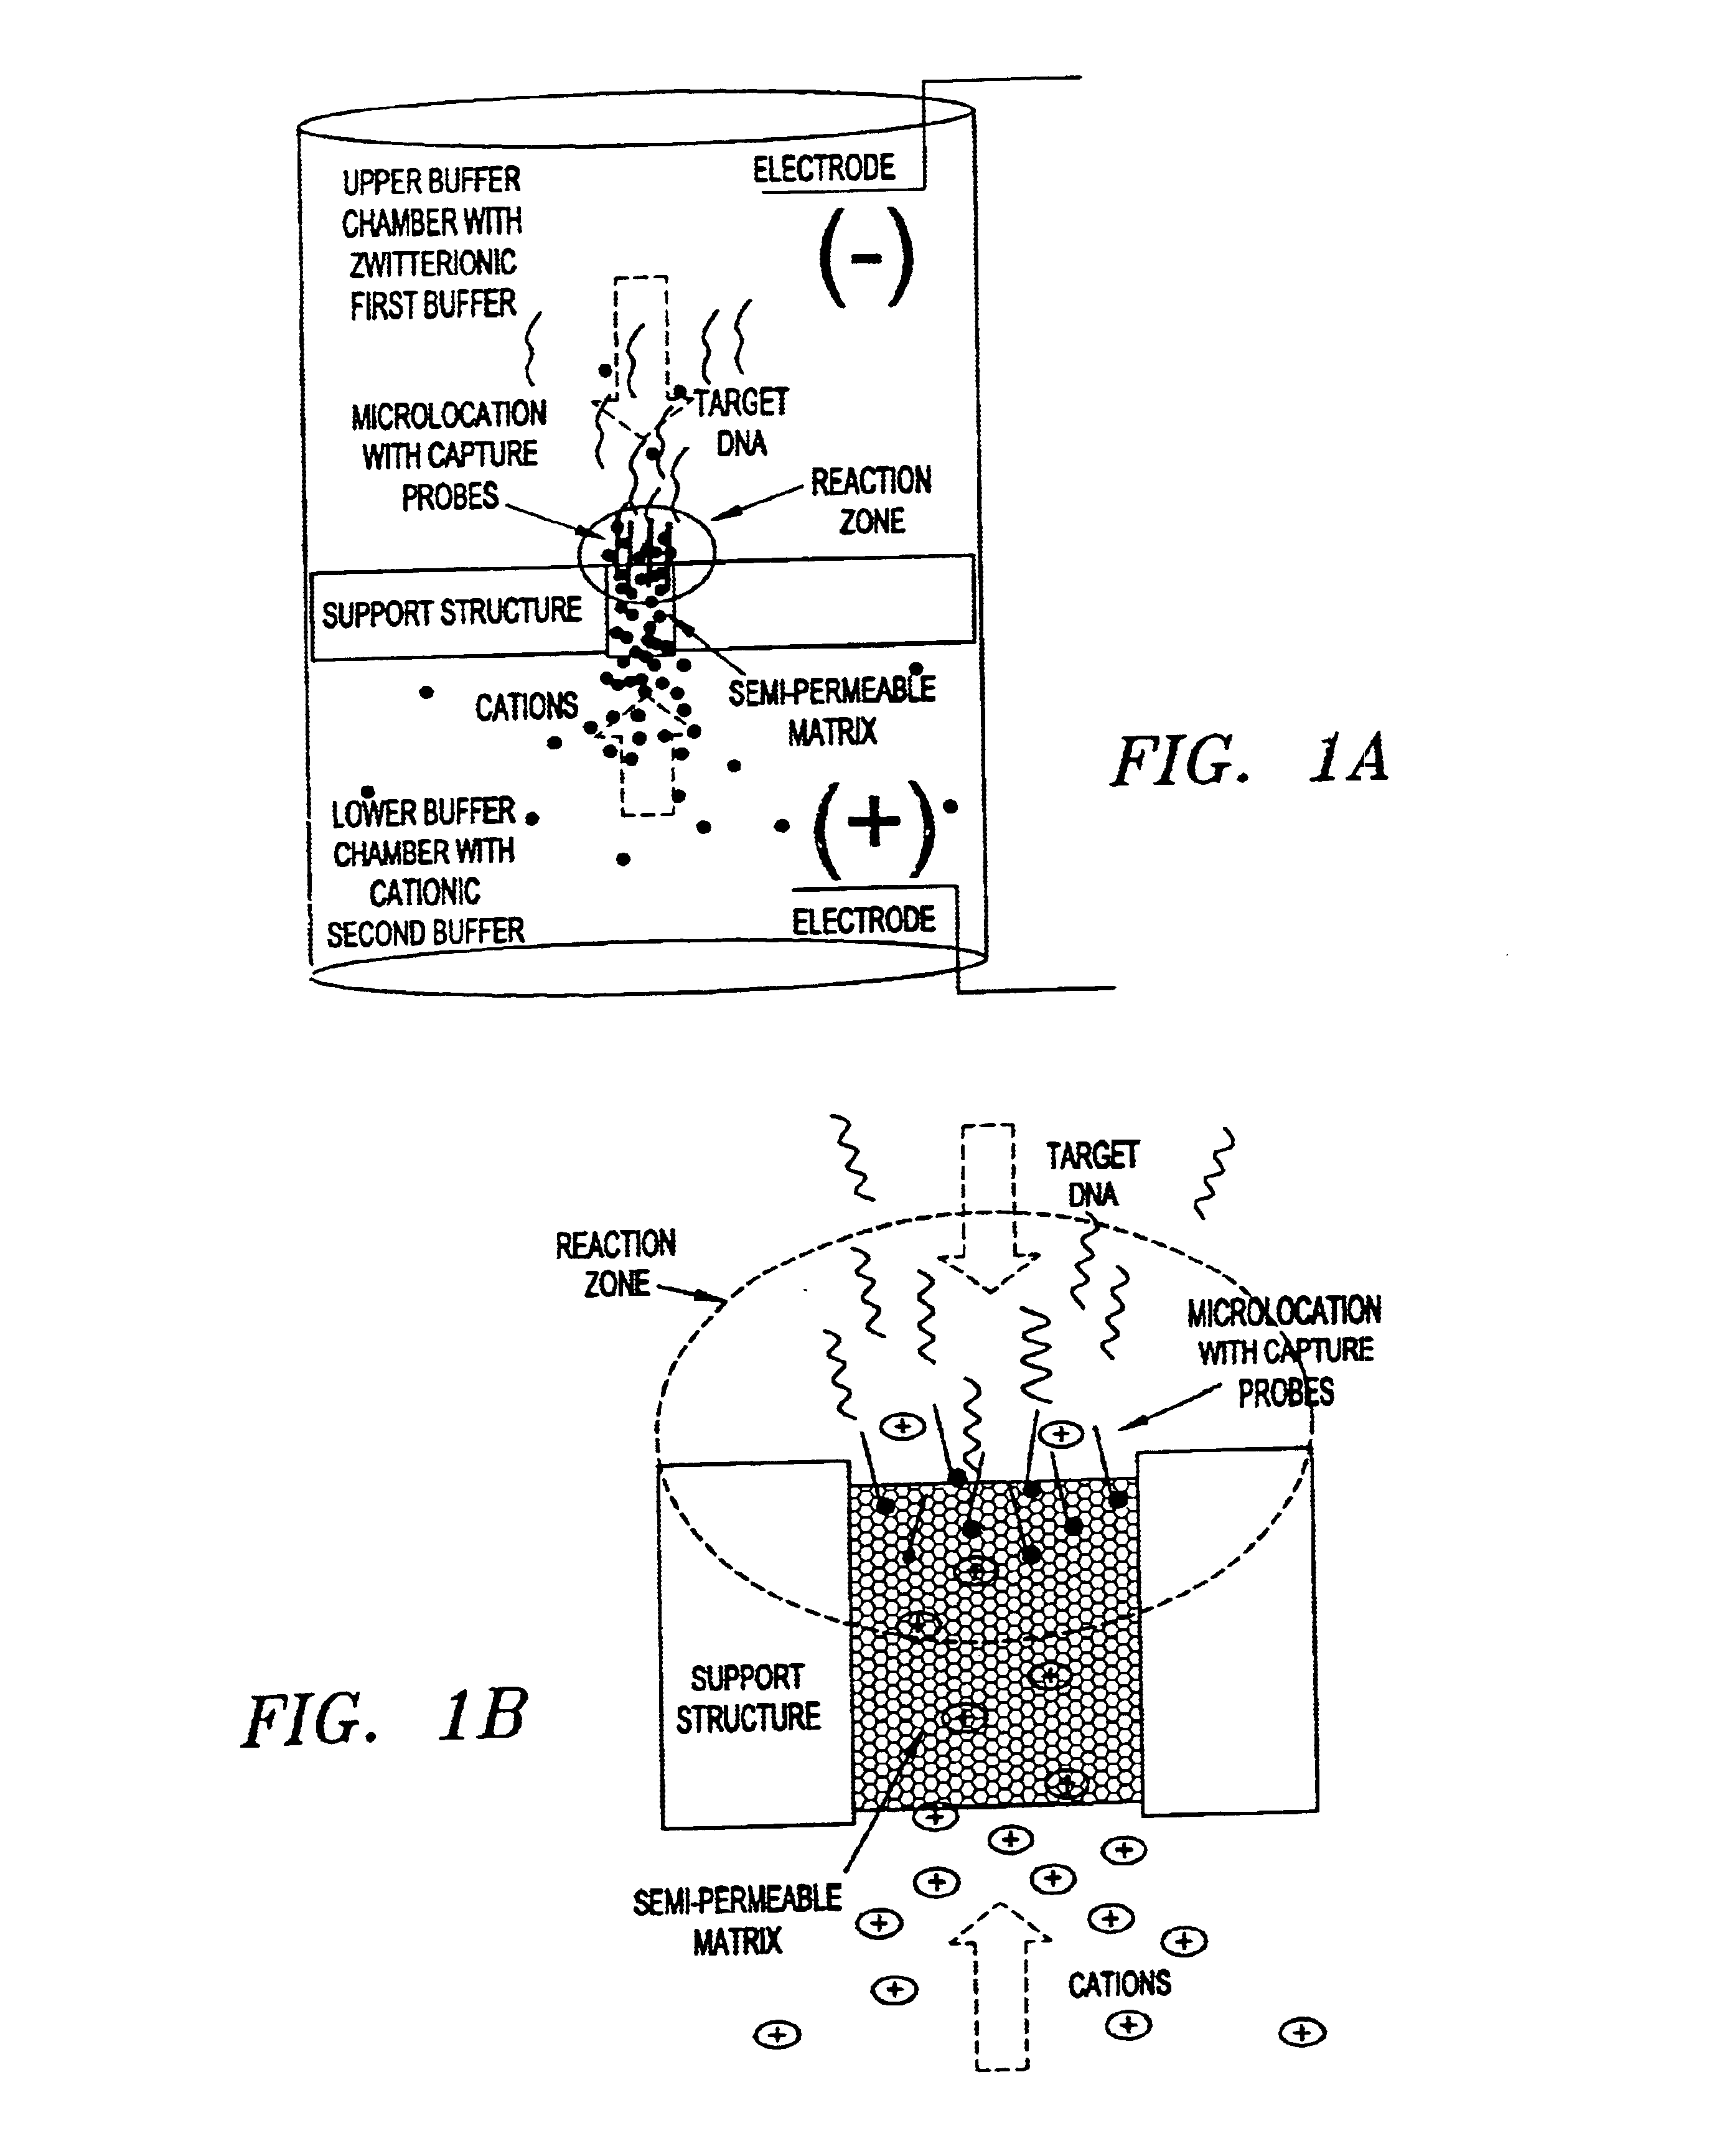 Electronic systems and component devices for macroscopic and microscopic molecular biological reactions, analyses and diagnostics